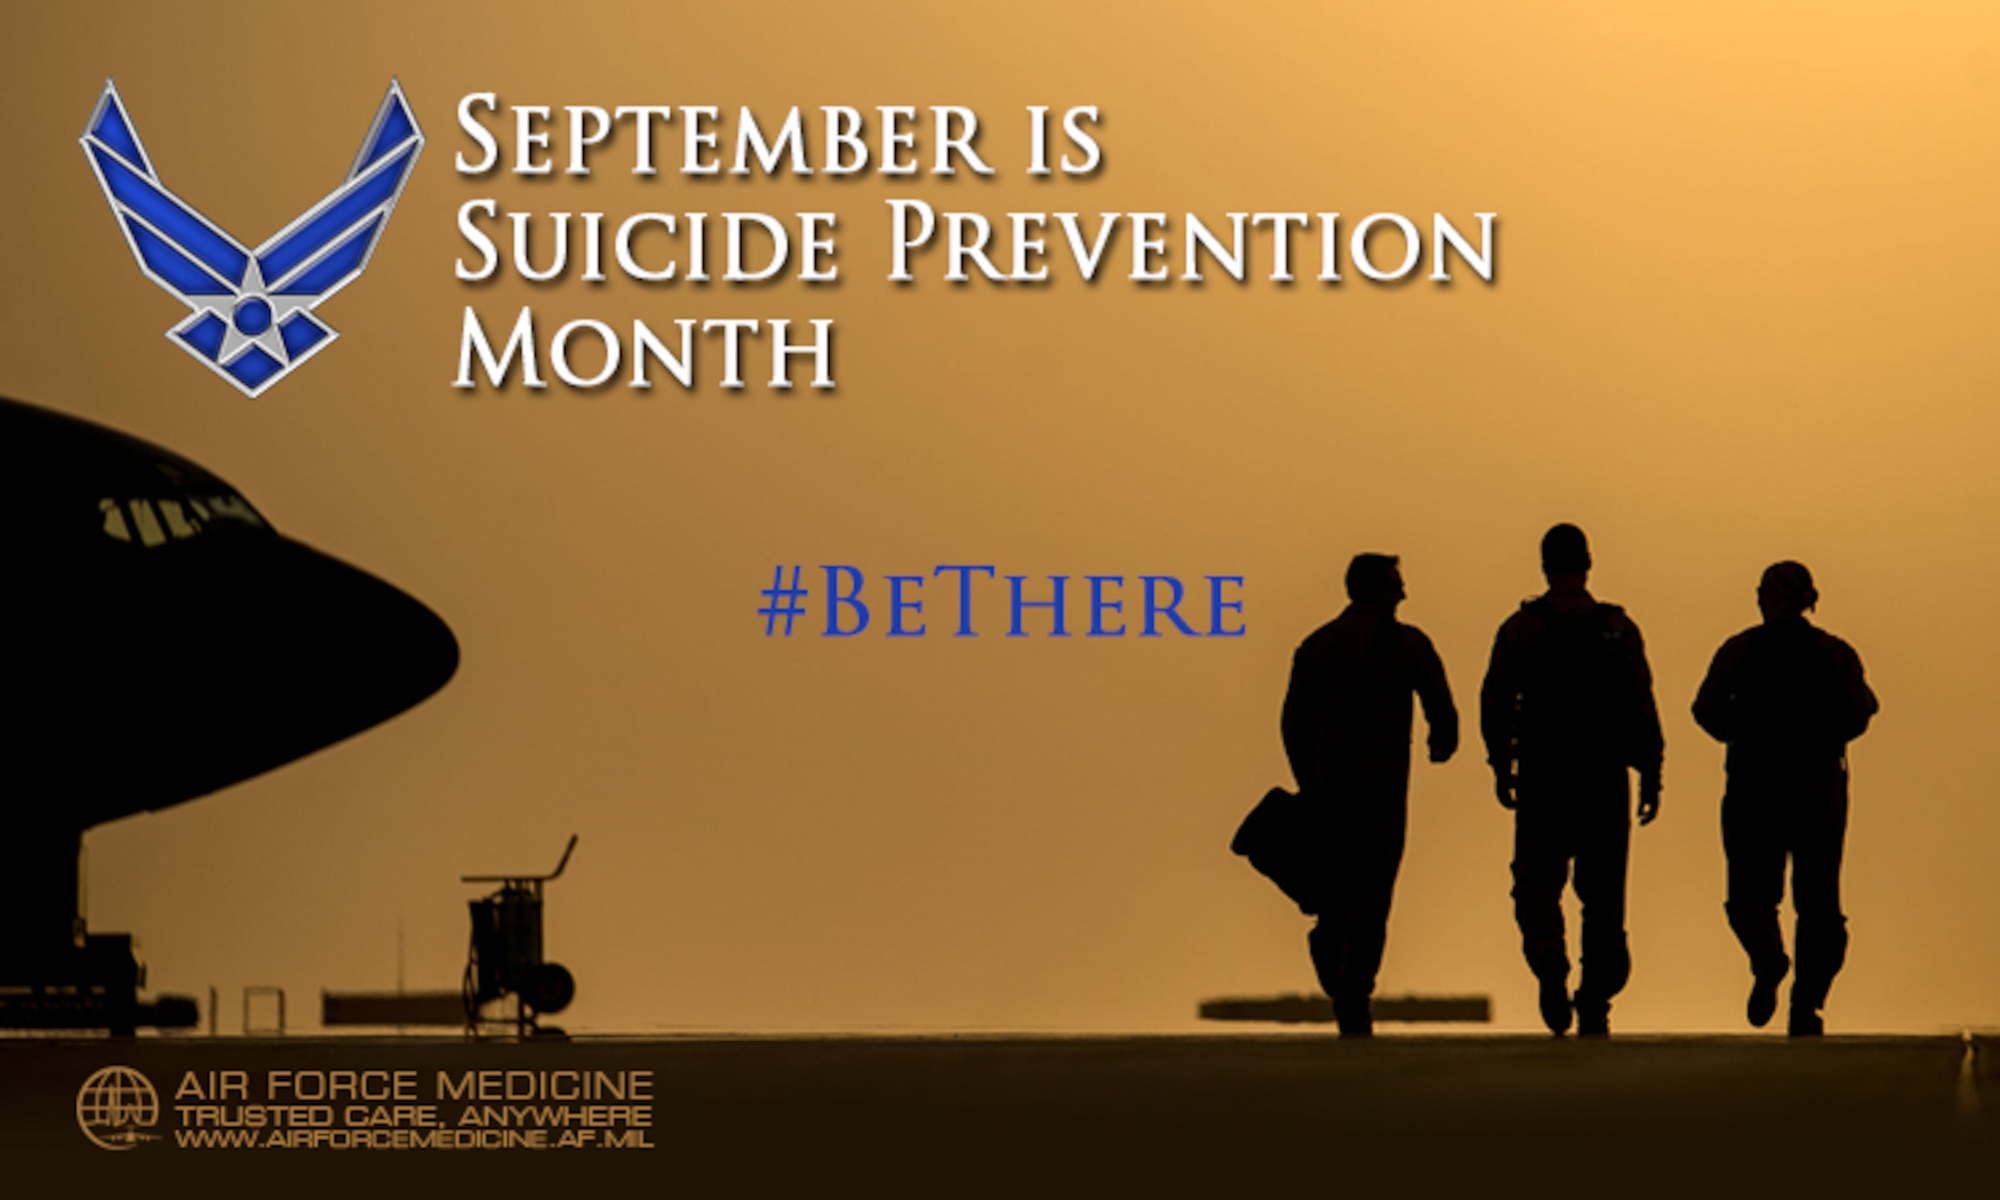 September is Suicide Prevention Month. You don’t need to be a specialist or doctor to help prevent suicide. Sometimes all it takes is starting a conversation. Be there for your Wingman.